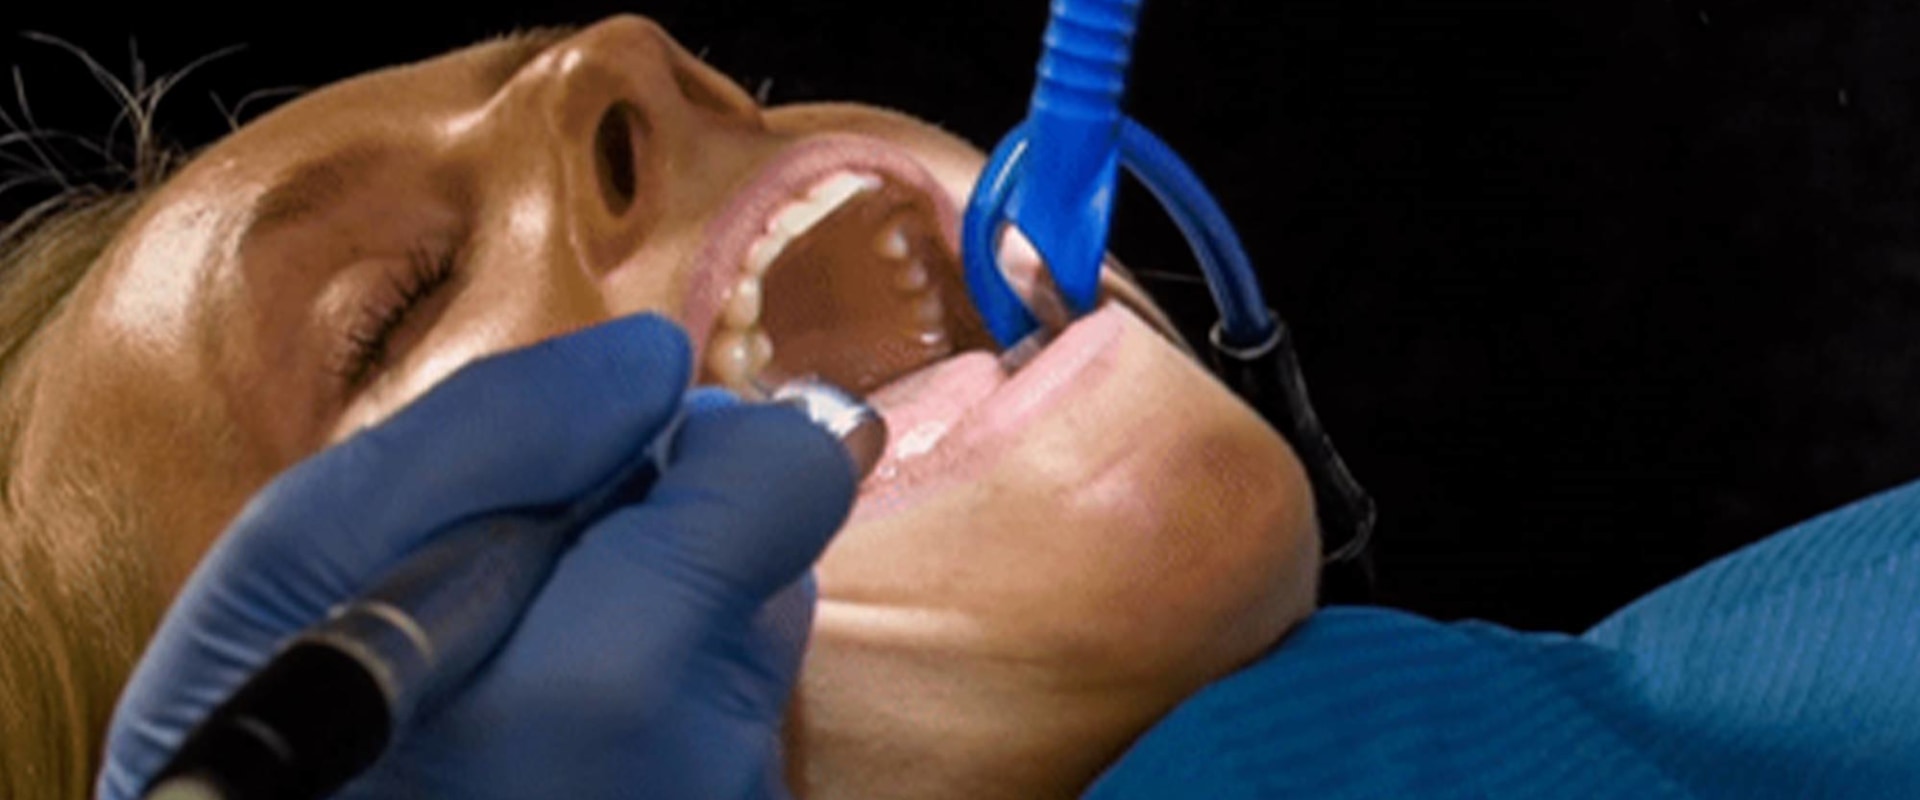 4 Reasons Why Your Dentist Uses Dental Suction Devices